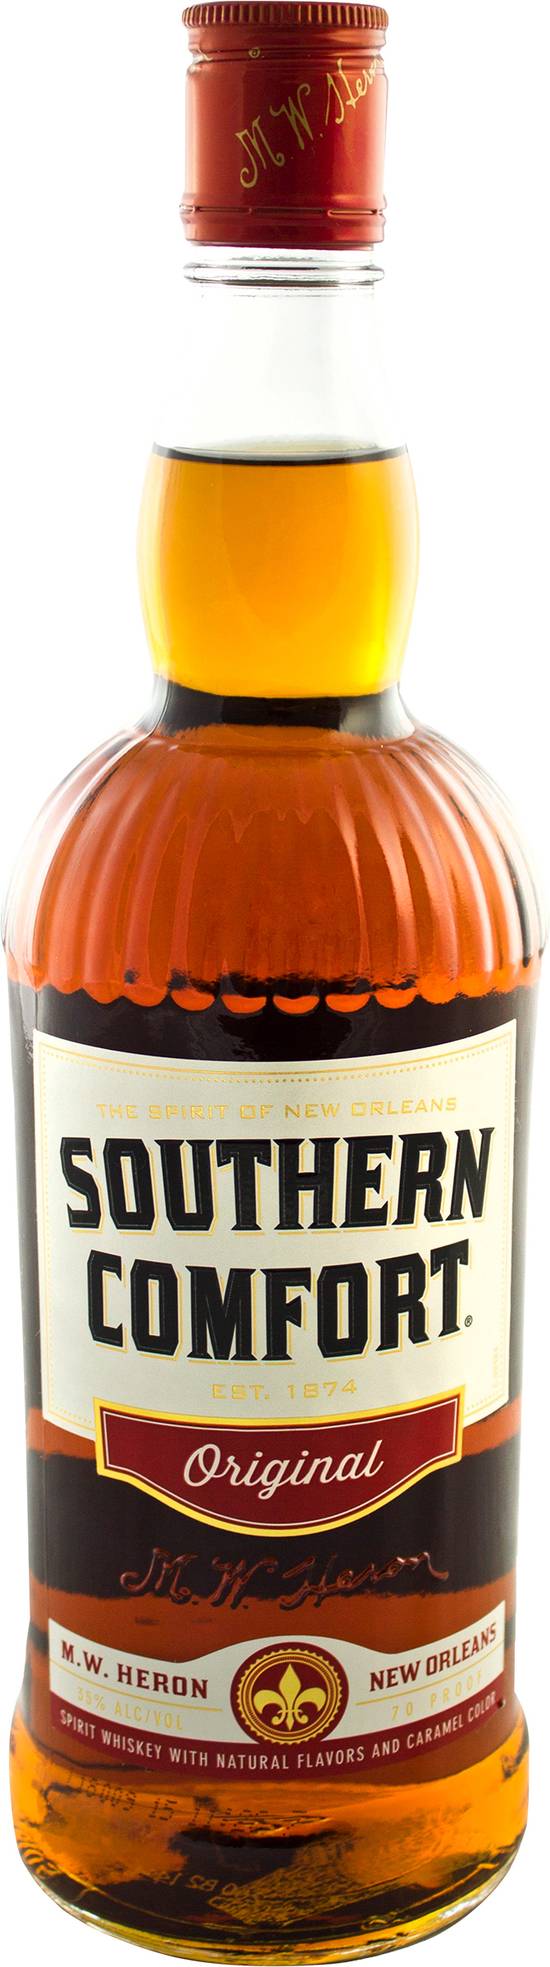 Southern Comfort New Orlenans Original Whiskey (750 ml)